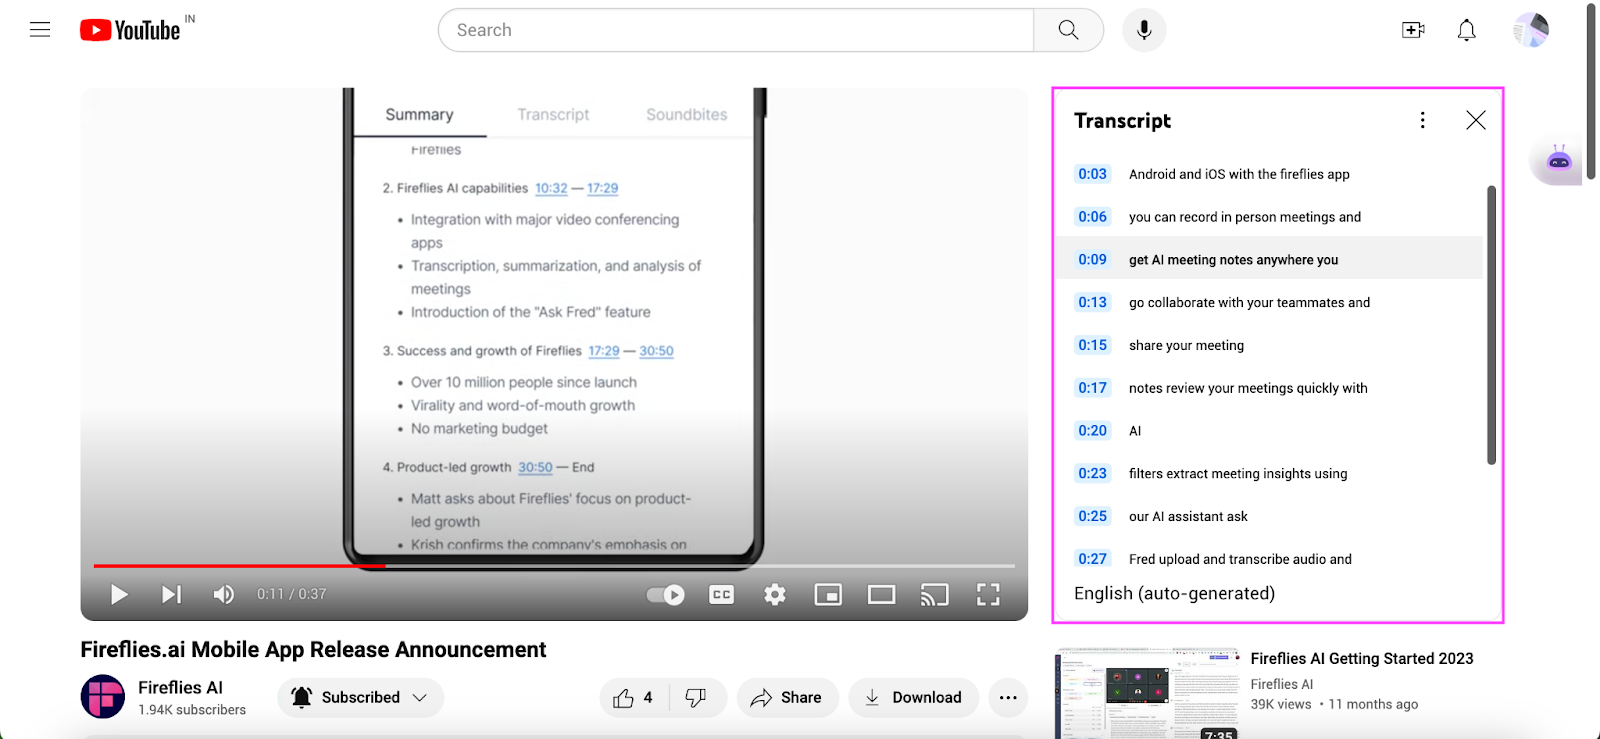 How to get a YouTube transcript of a video on desktop